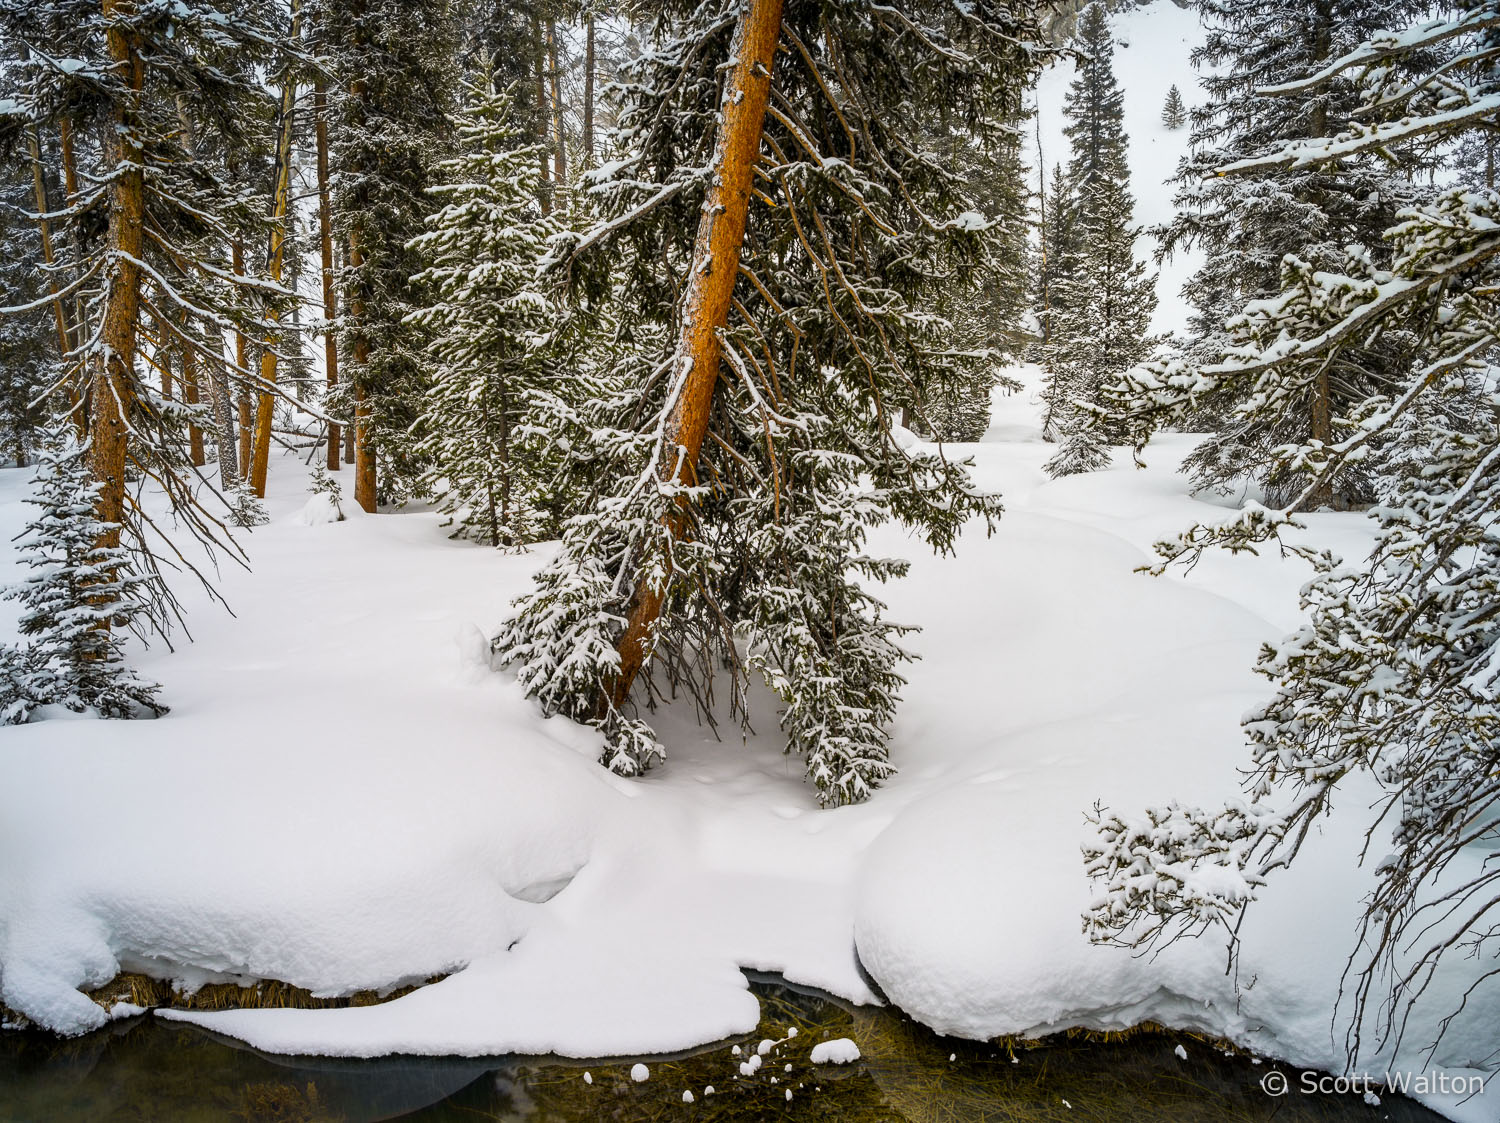 forest-detail-loop-road-snow-yellowstone-national-park-wyoming.jpg